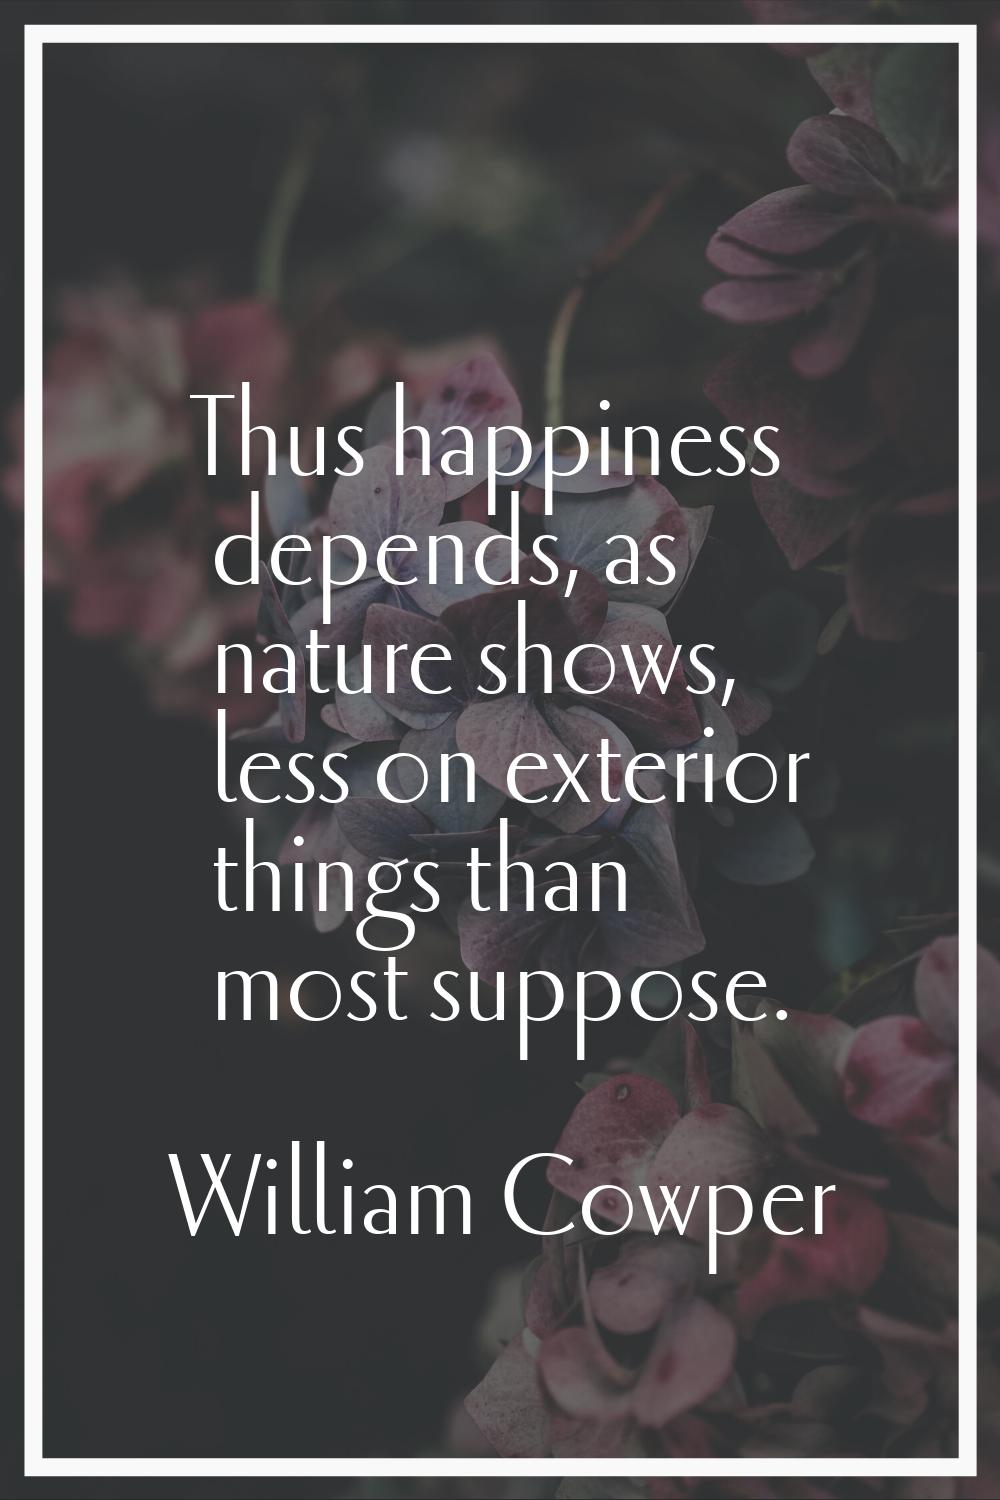 Thus happiness depends, as nature shows, less on exterior things than most suppose.